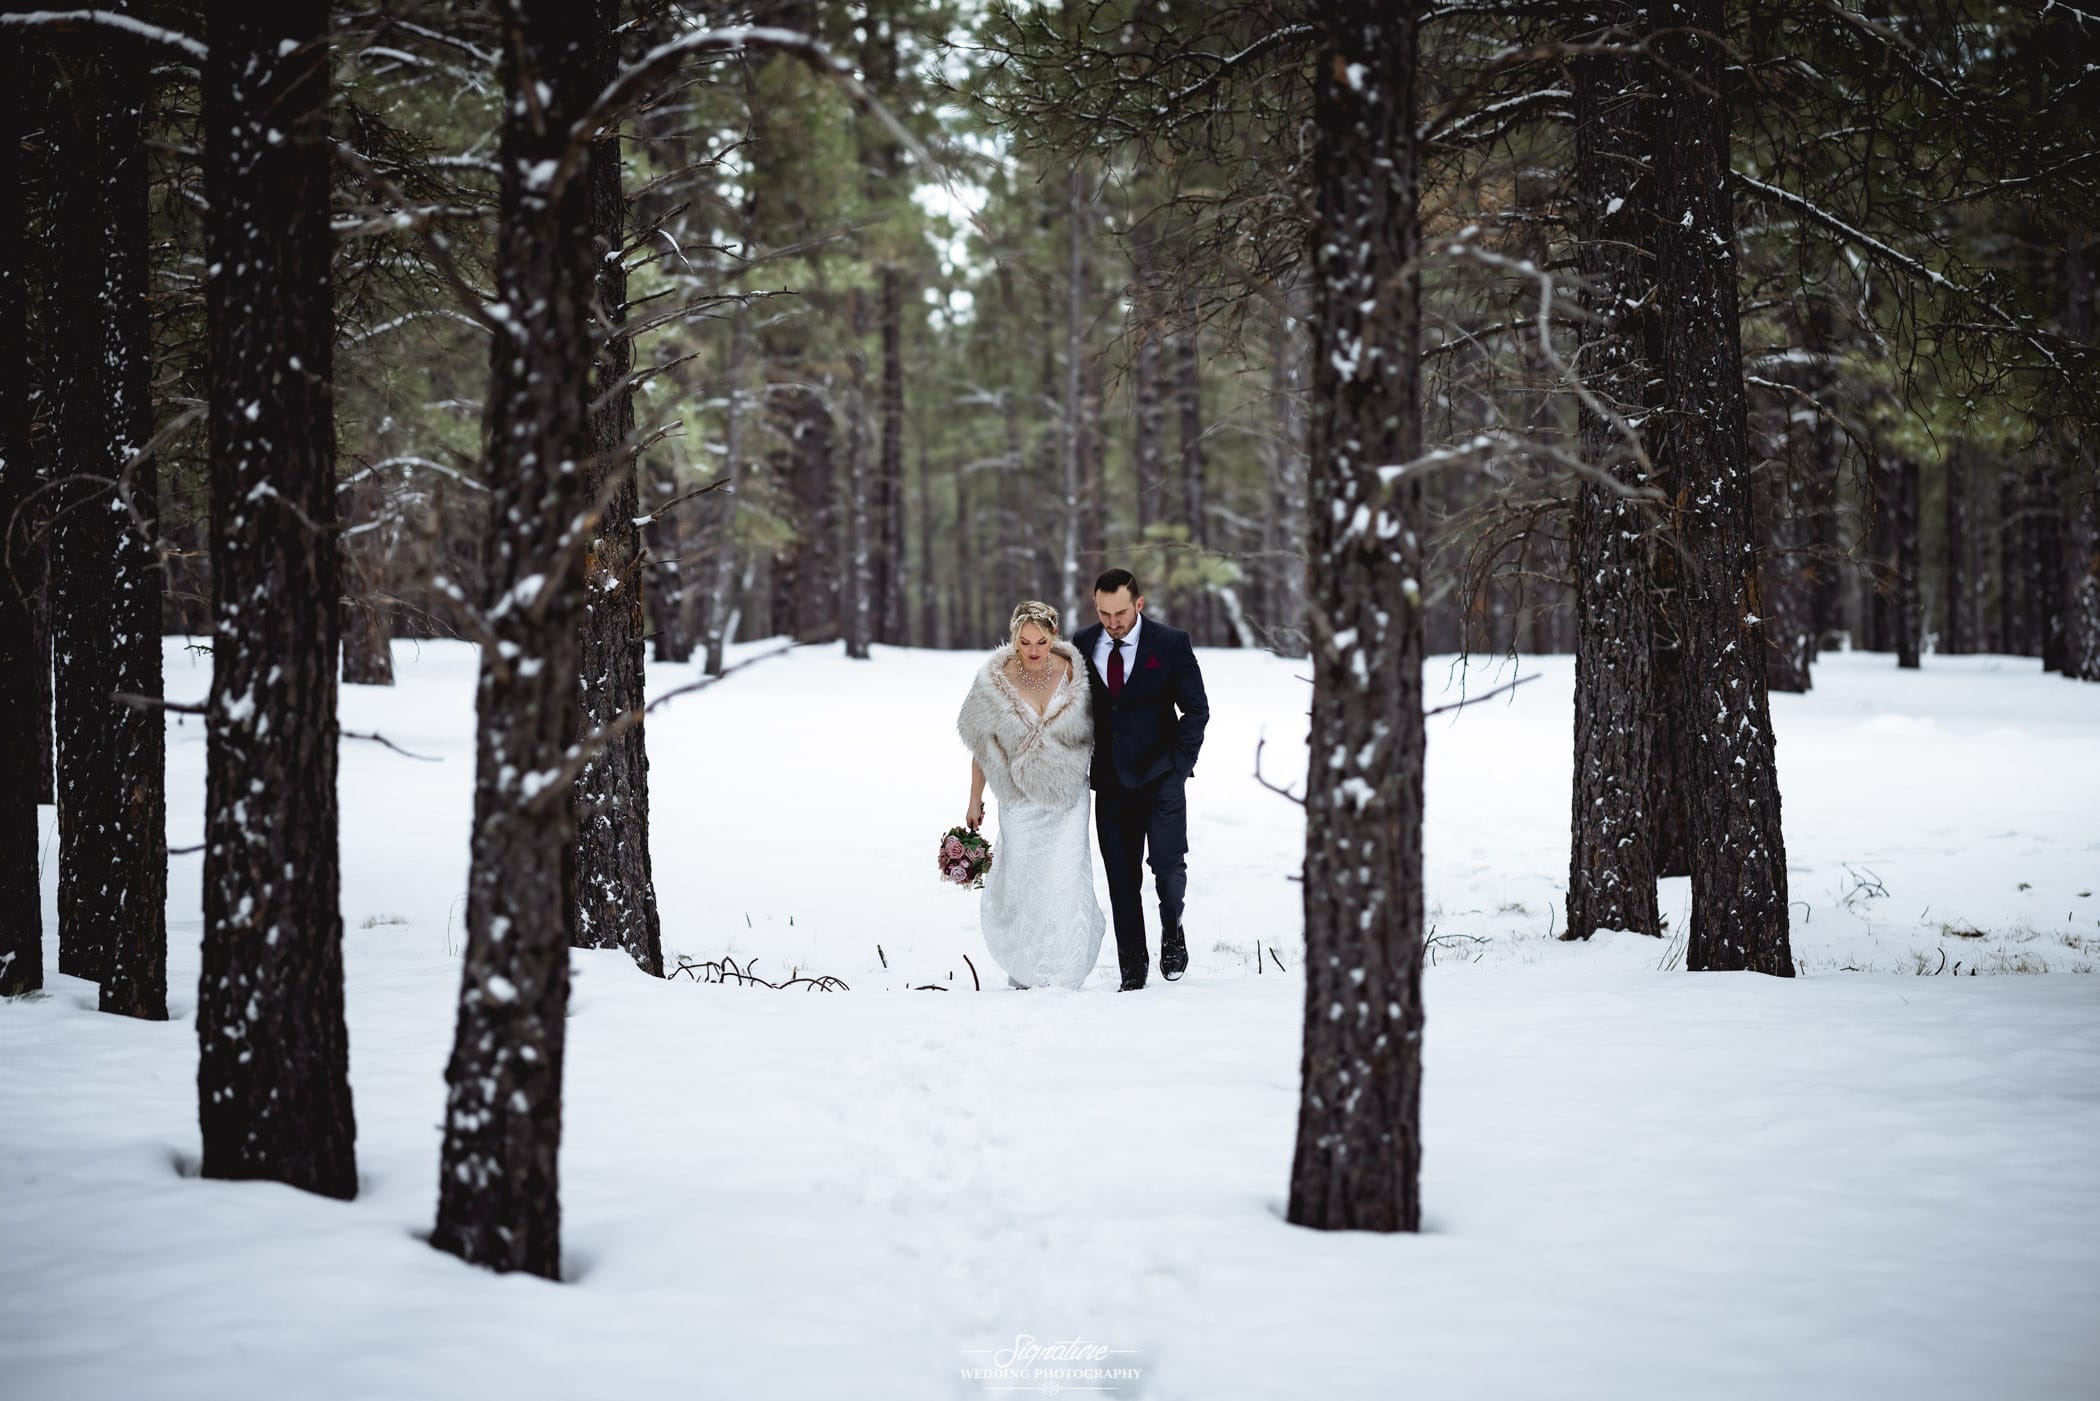 Bride and groom walking in winter forest